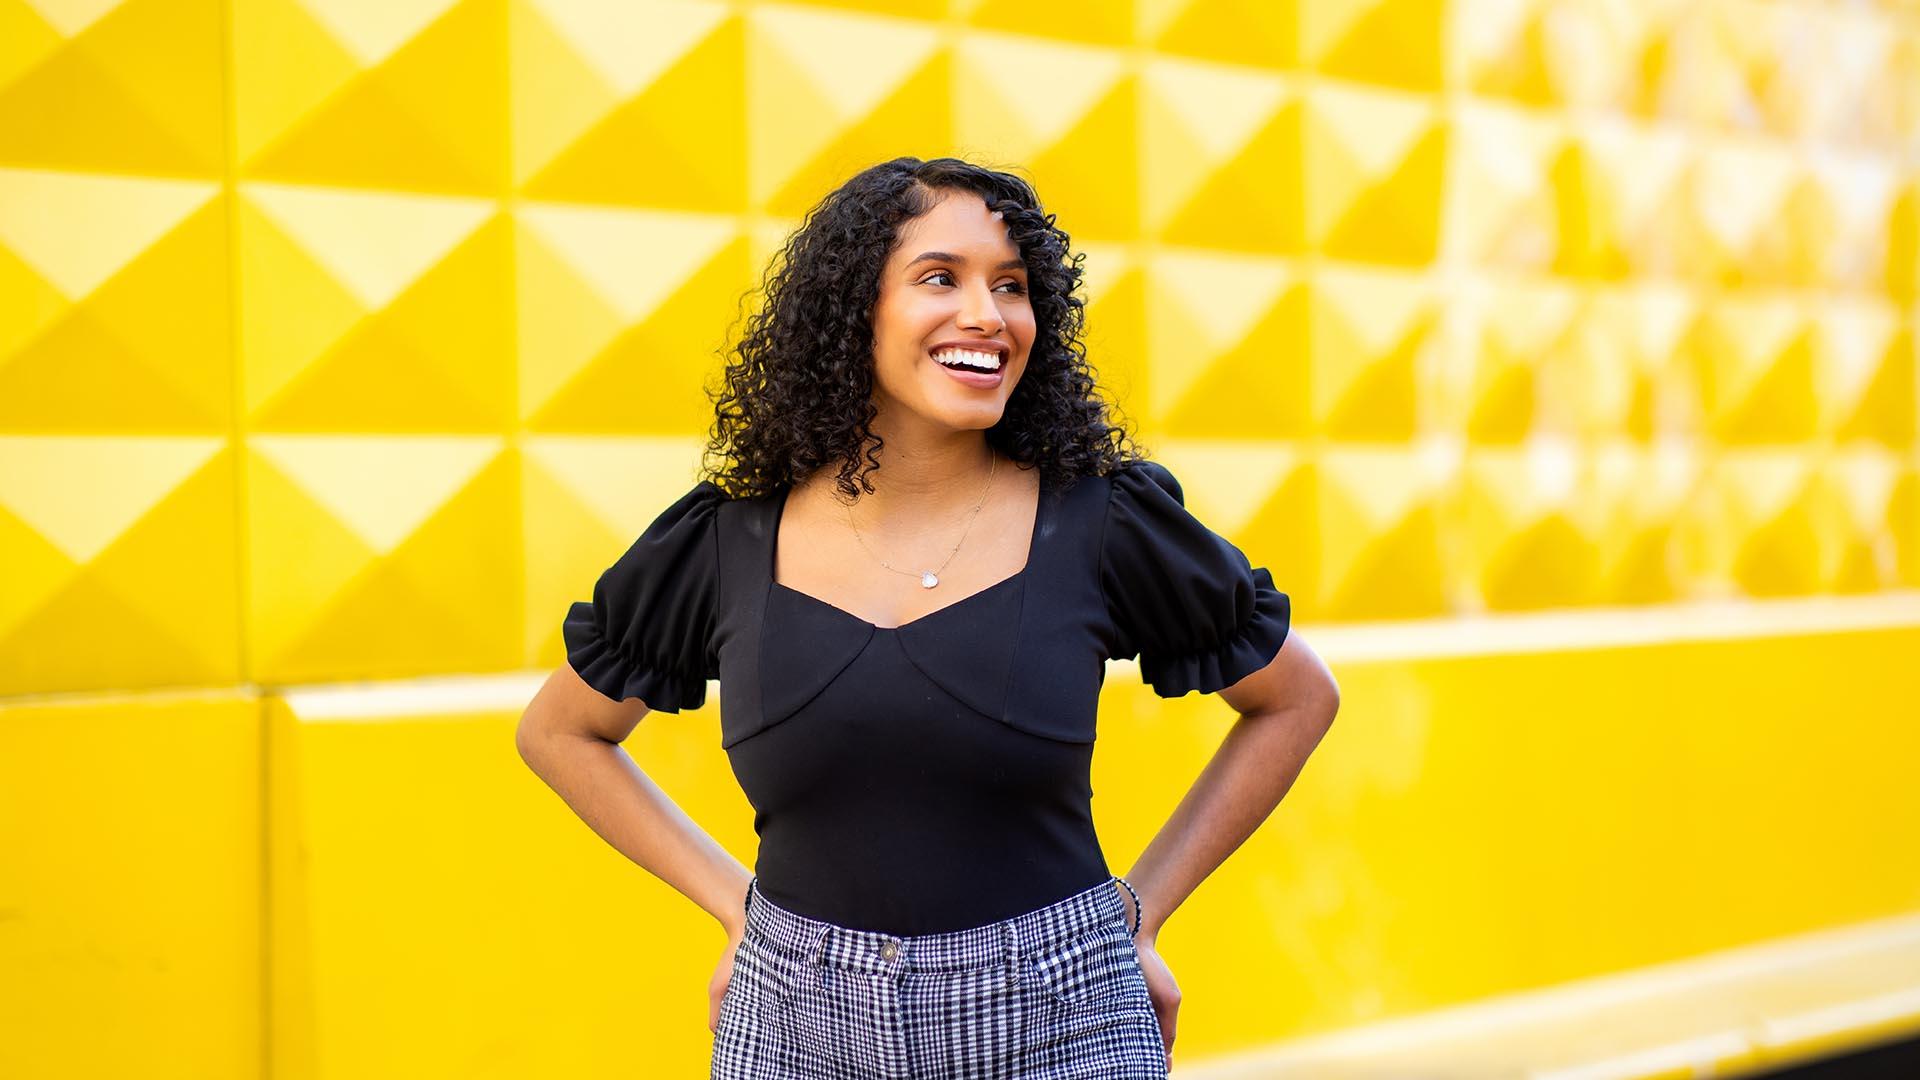 Ines Calvete Barrio in front of a bright yellow wall, her hands on her hips and something happening off to the left that must be making her very happy, evidenced by a glowing smile.